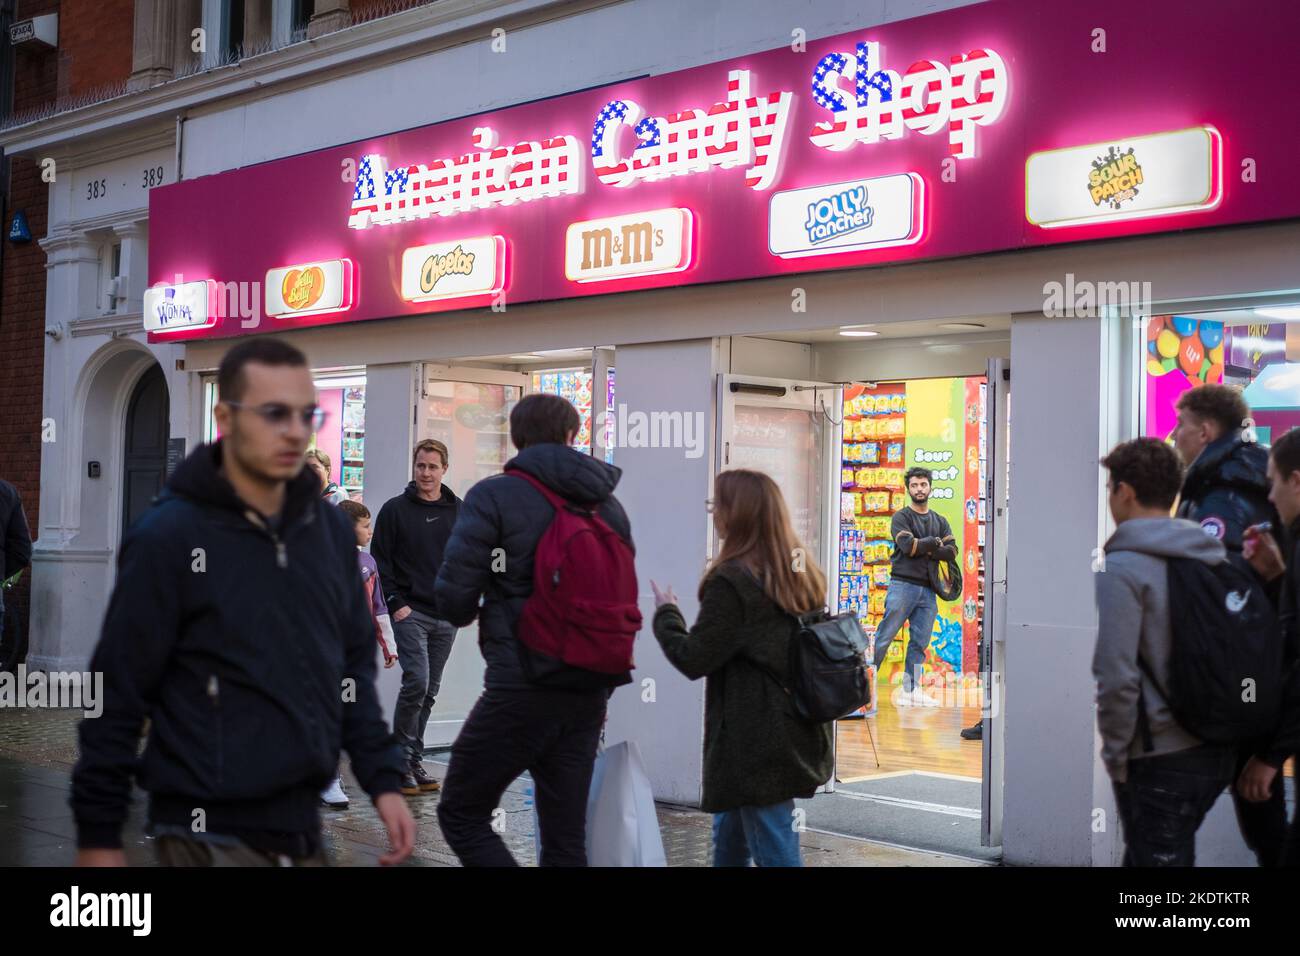 London, UK - November 6, 2022: American Candy Shop sign on busy Oxford shopping street. Stock Photo